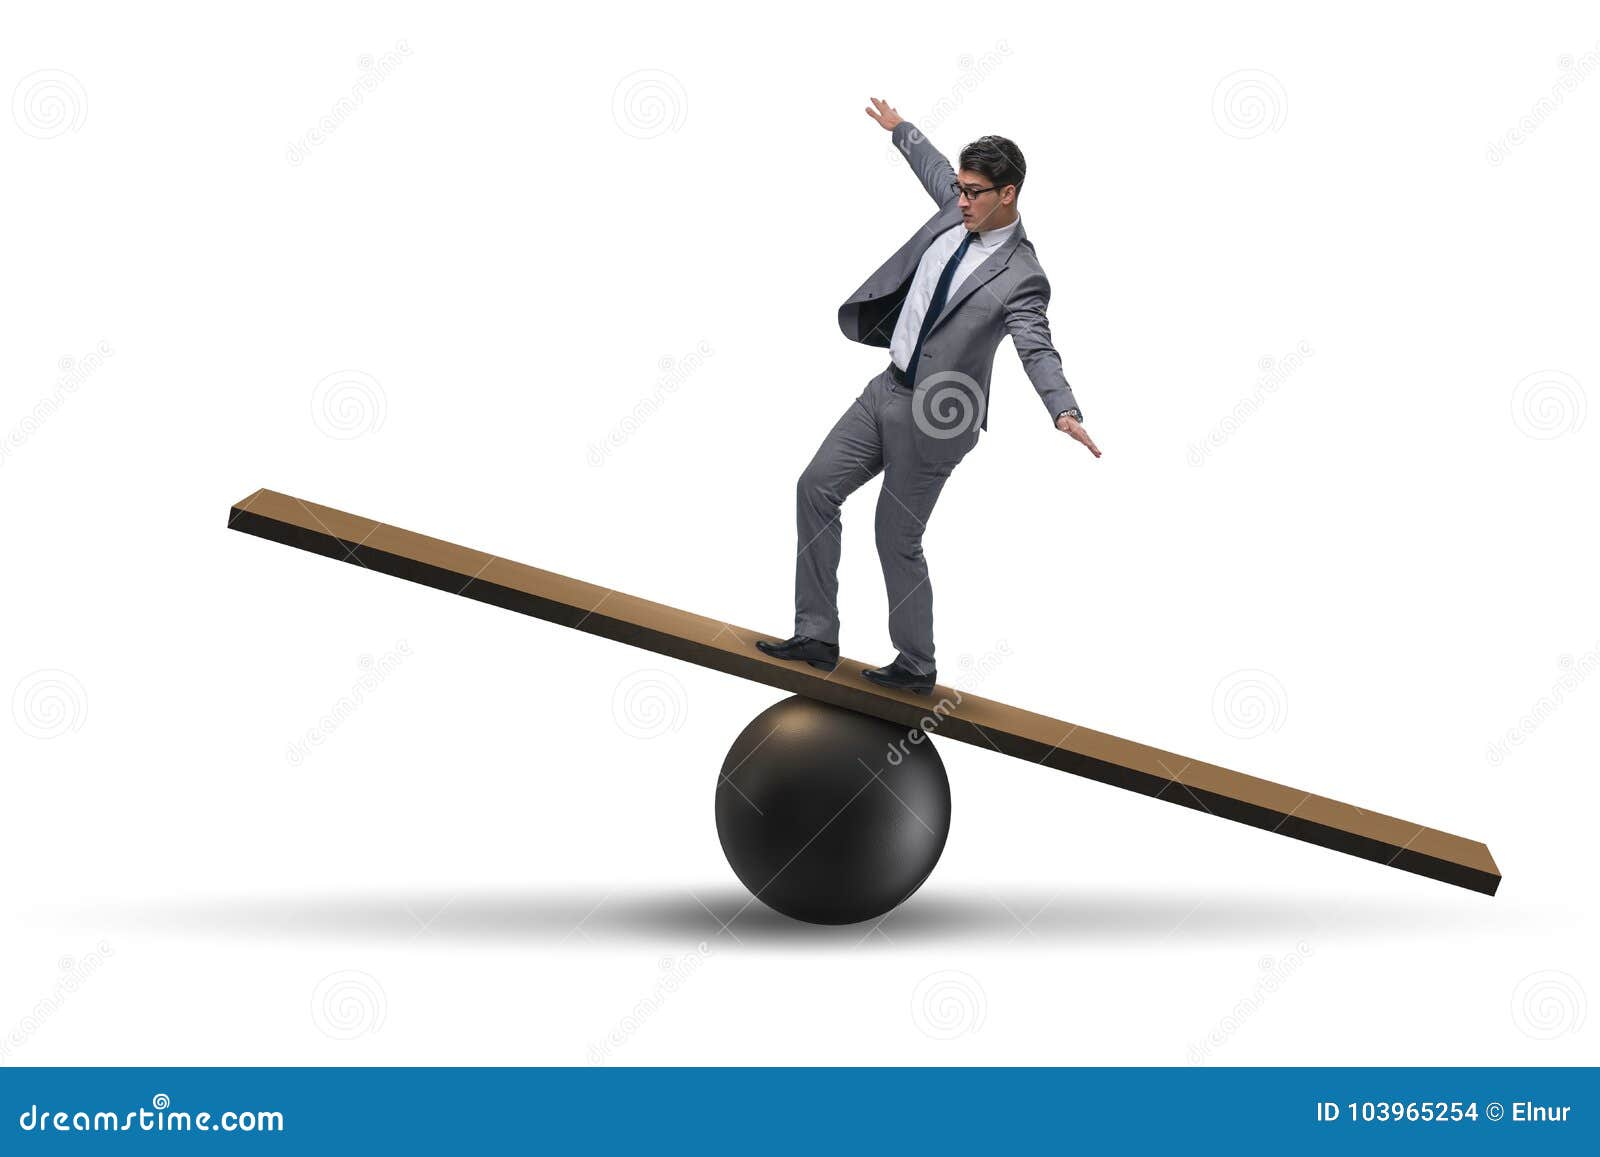 the businessman balancing on seesaw in uncertainty concept